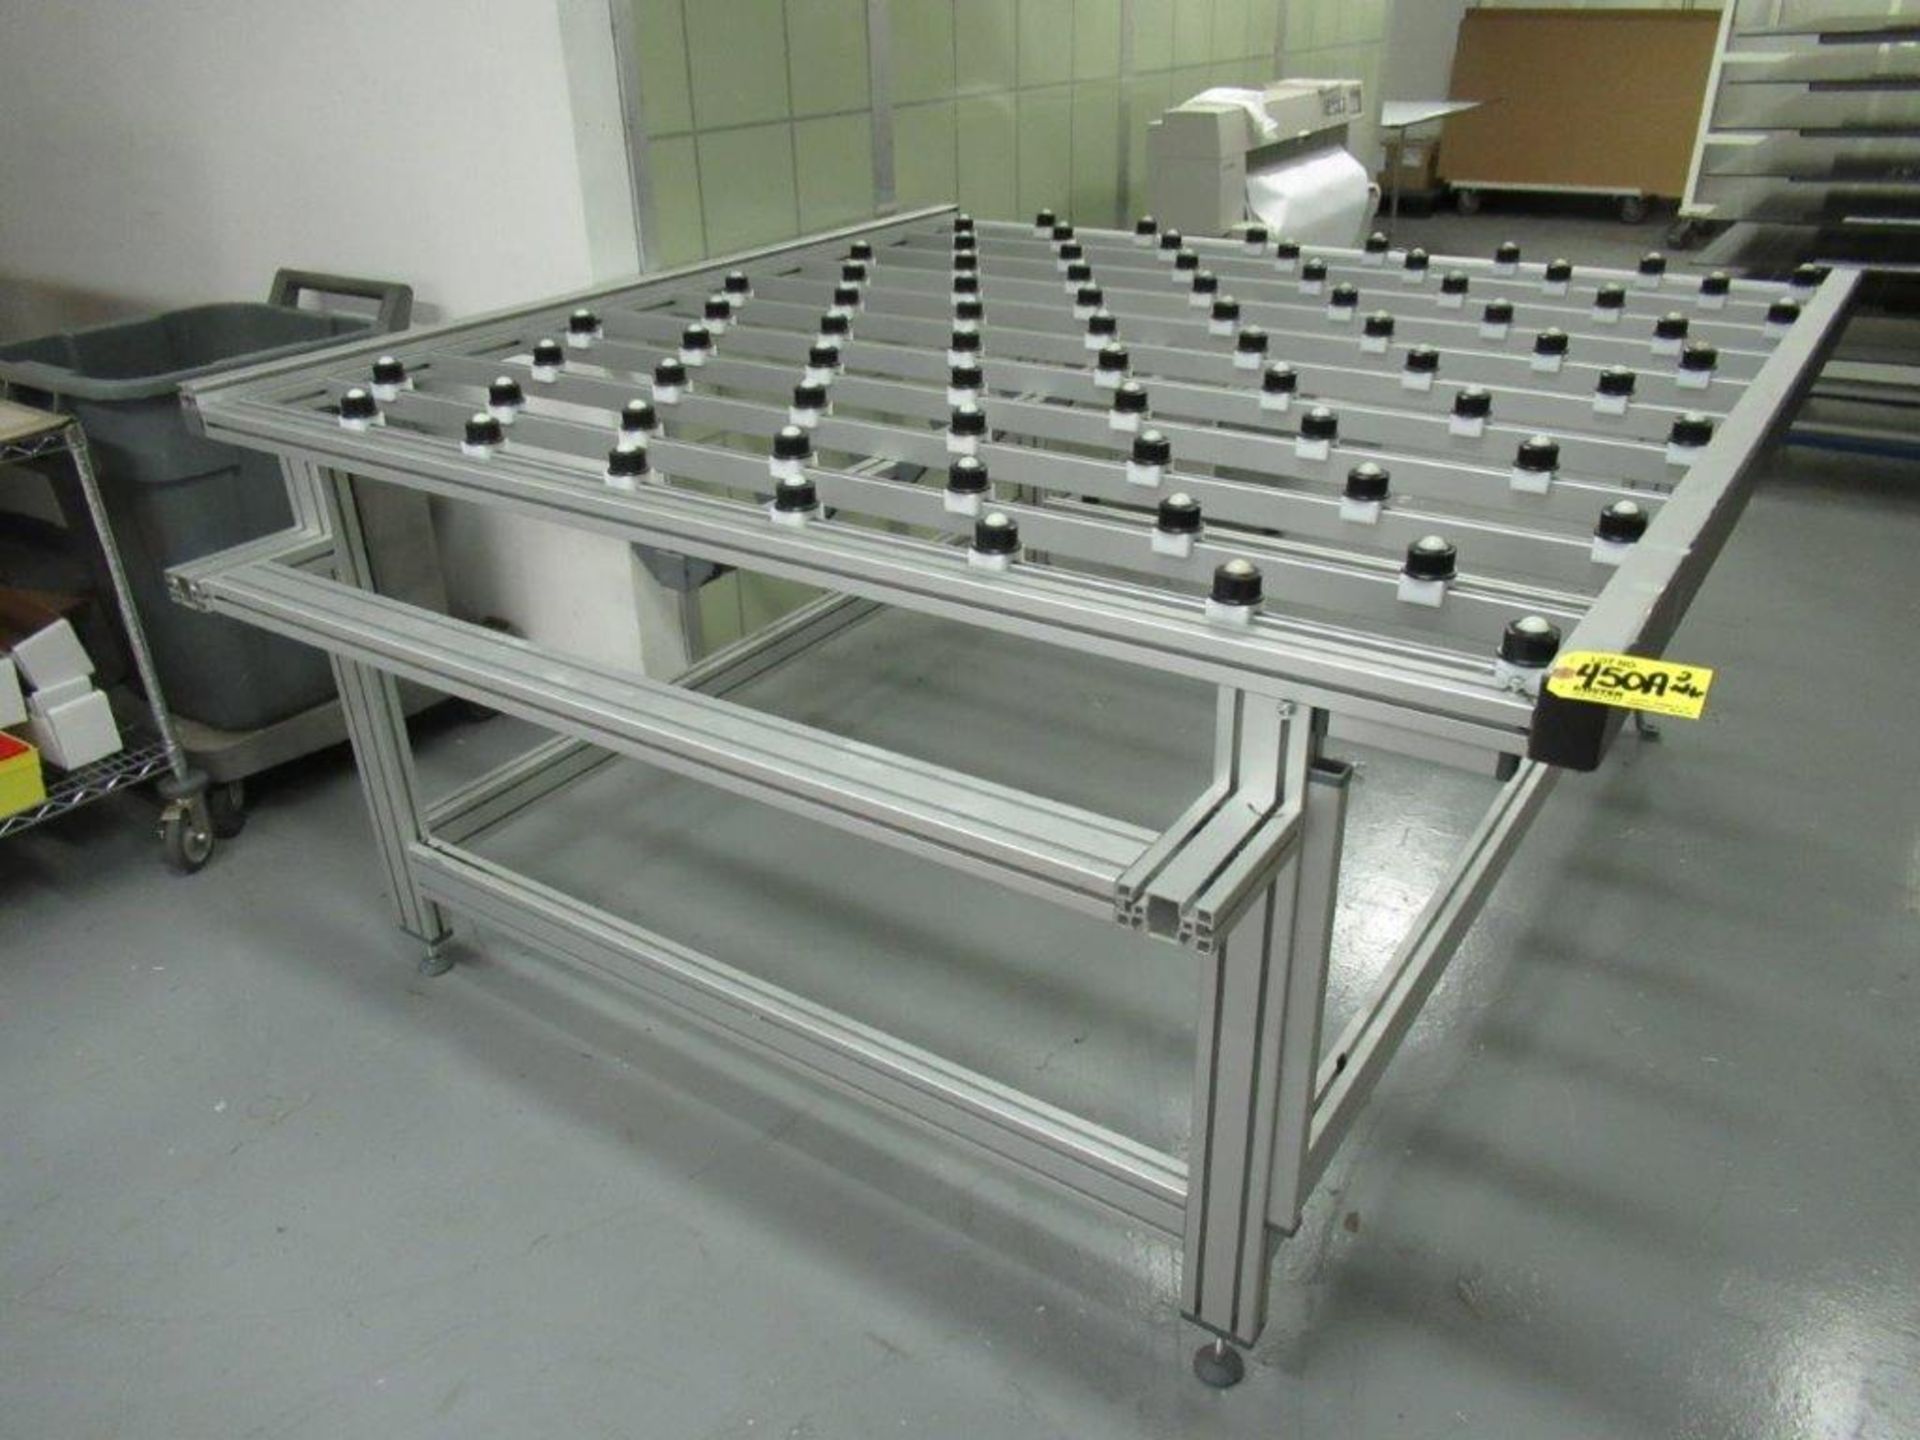 72" X 51" BALL TRANSFER TABLE, PNEUMATIC LIFT, 80" X 80" BALL TRANSFER TABLE - Image 2 of 2